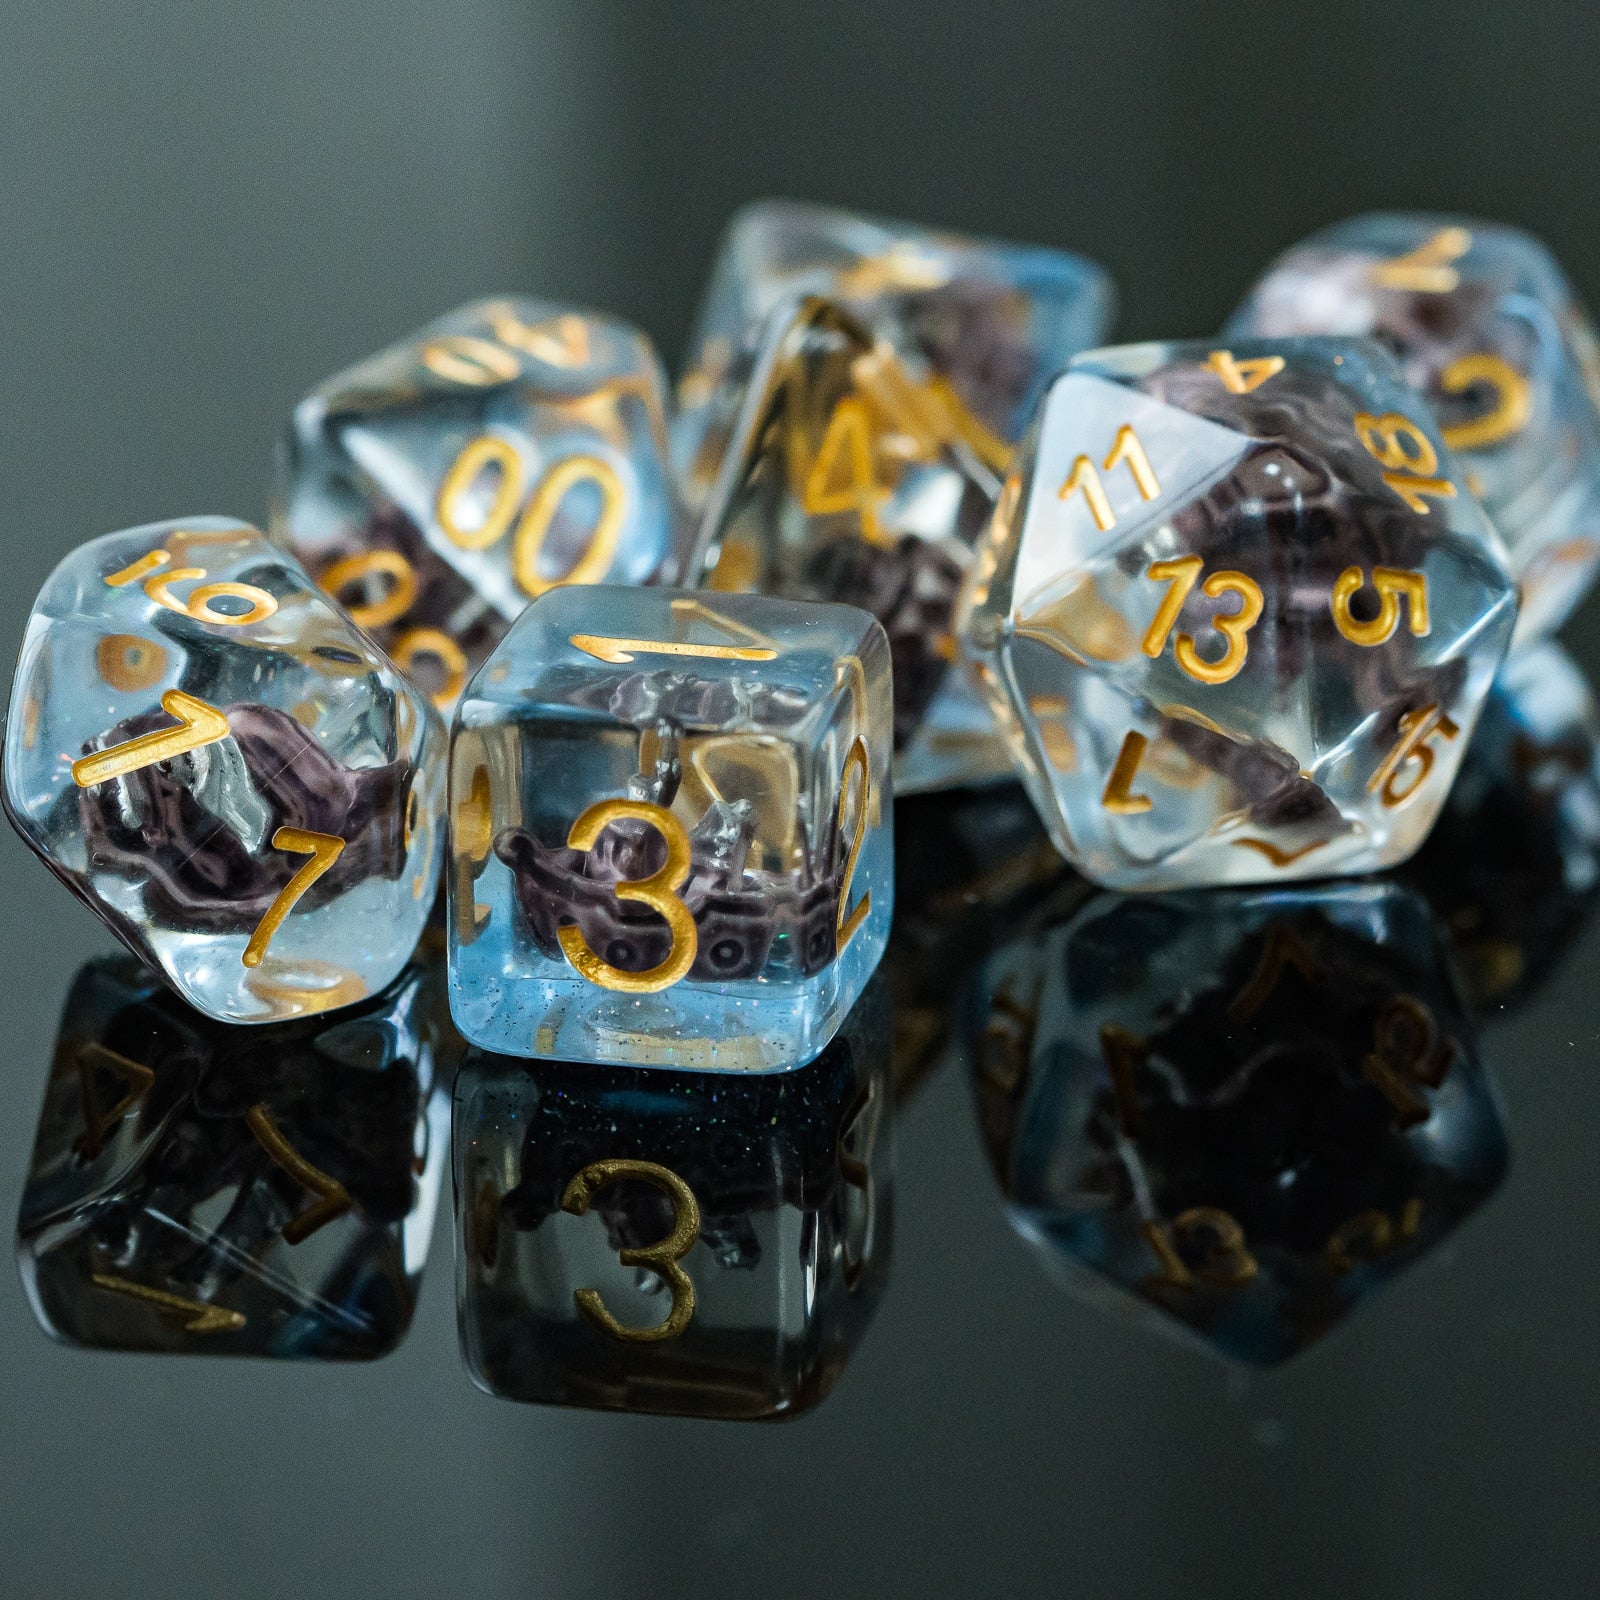 7 piece dice set, mini sailboats in resin, d6 at front